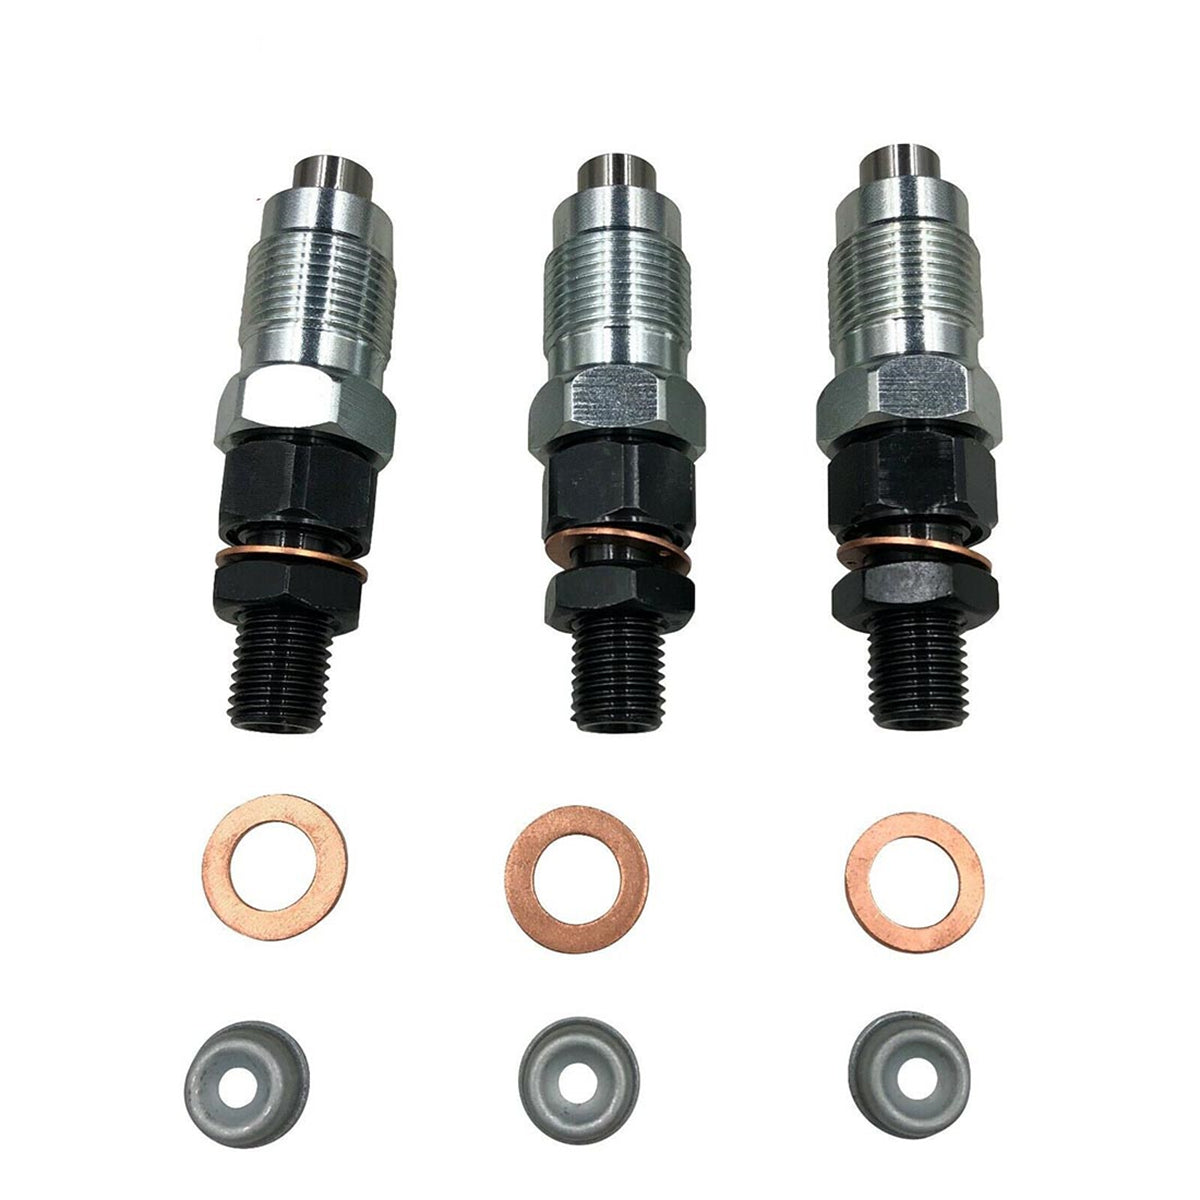 Daysyore 3pcs Fuel Injector, Fuel Injector H1600-53000 16001-53002 16001-53000, Fuel Injector for Kubota, Fuel Injector D722 Engine,Auto Fuel Injector 